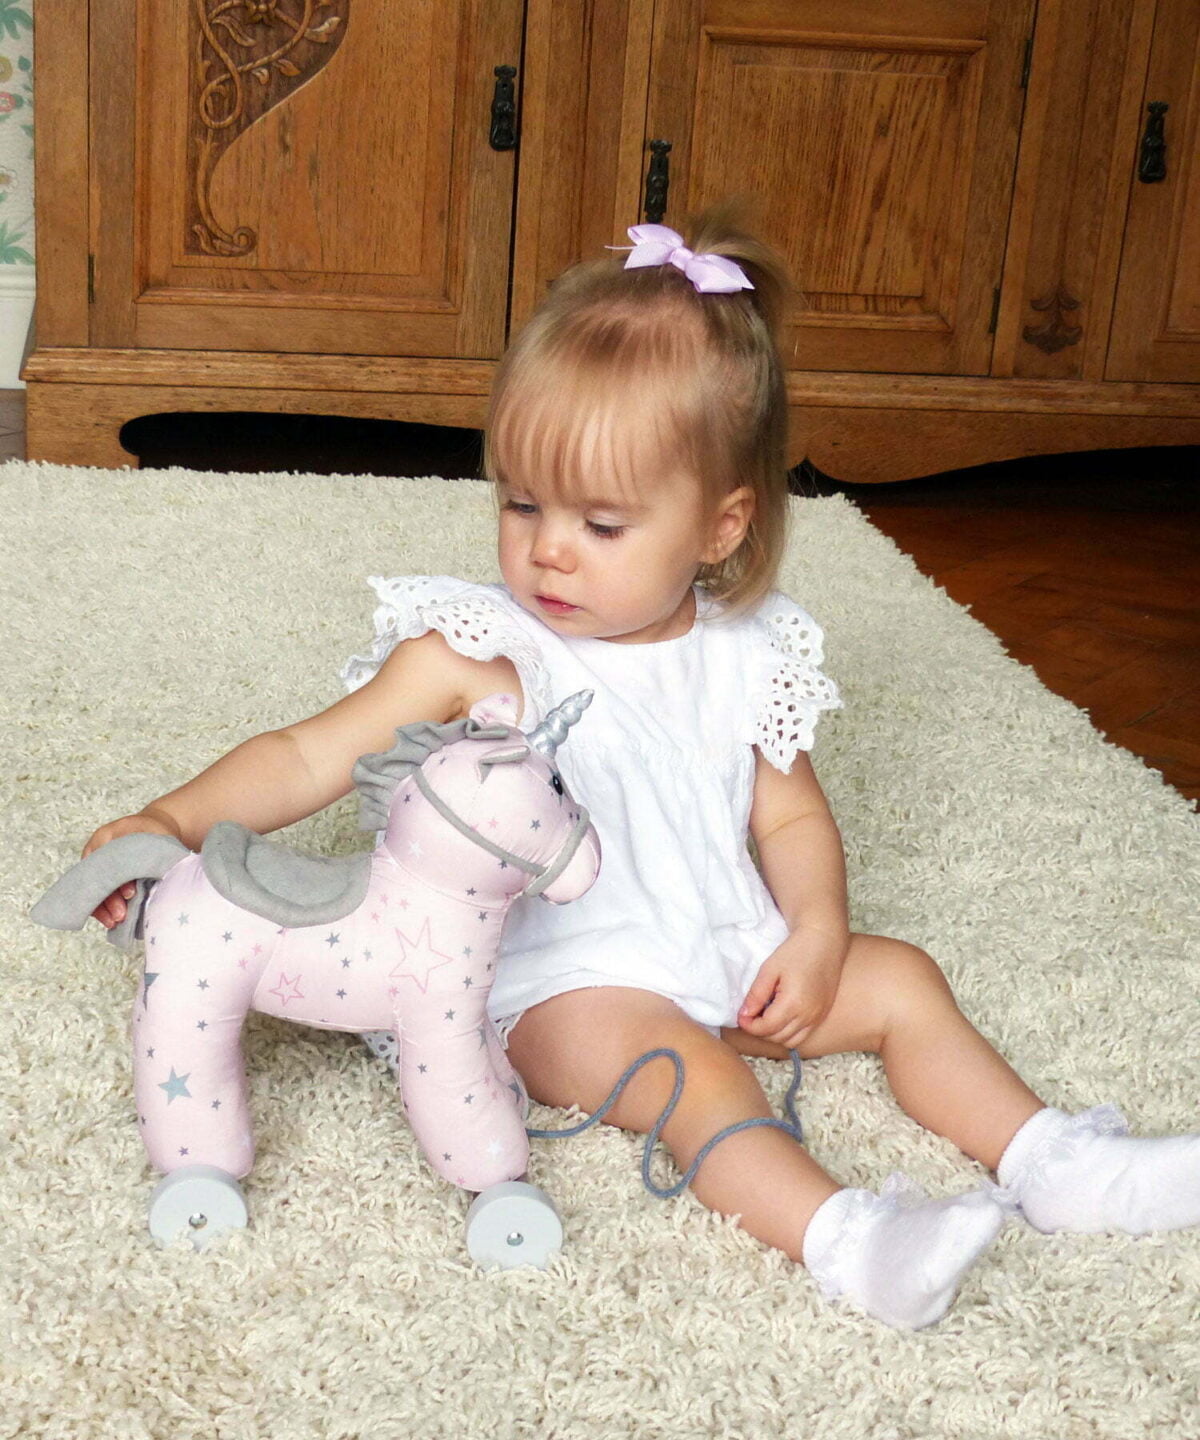 Baby Girl sat on white rug with Celeste Unicorn Pull Along Toy with pink star printed fabric